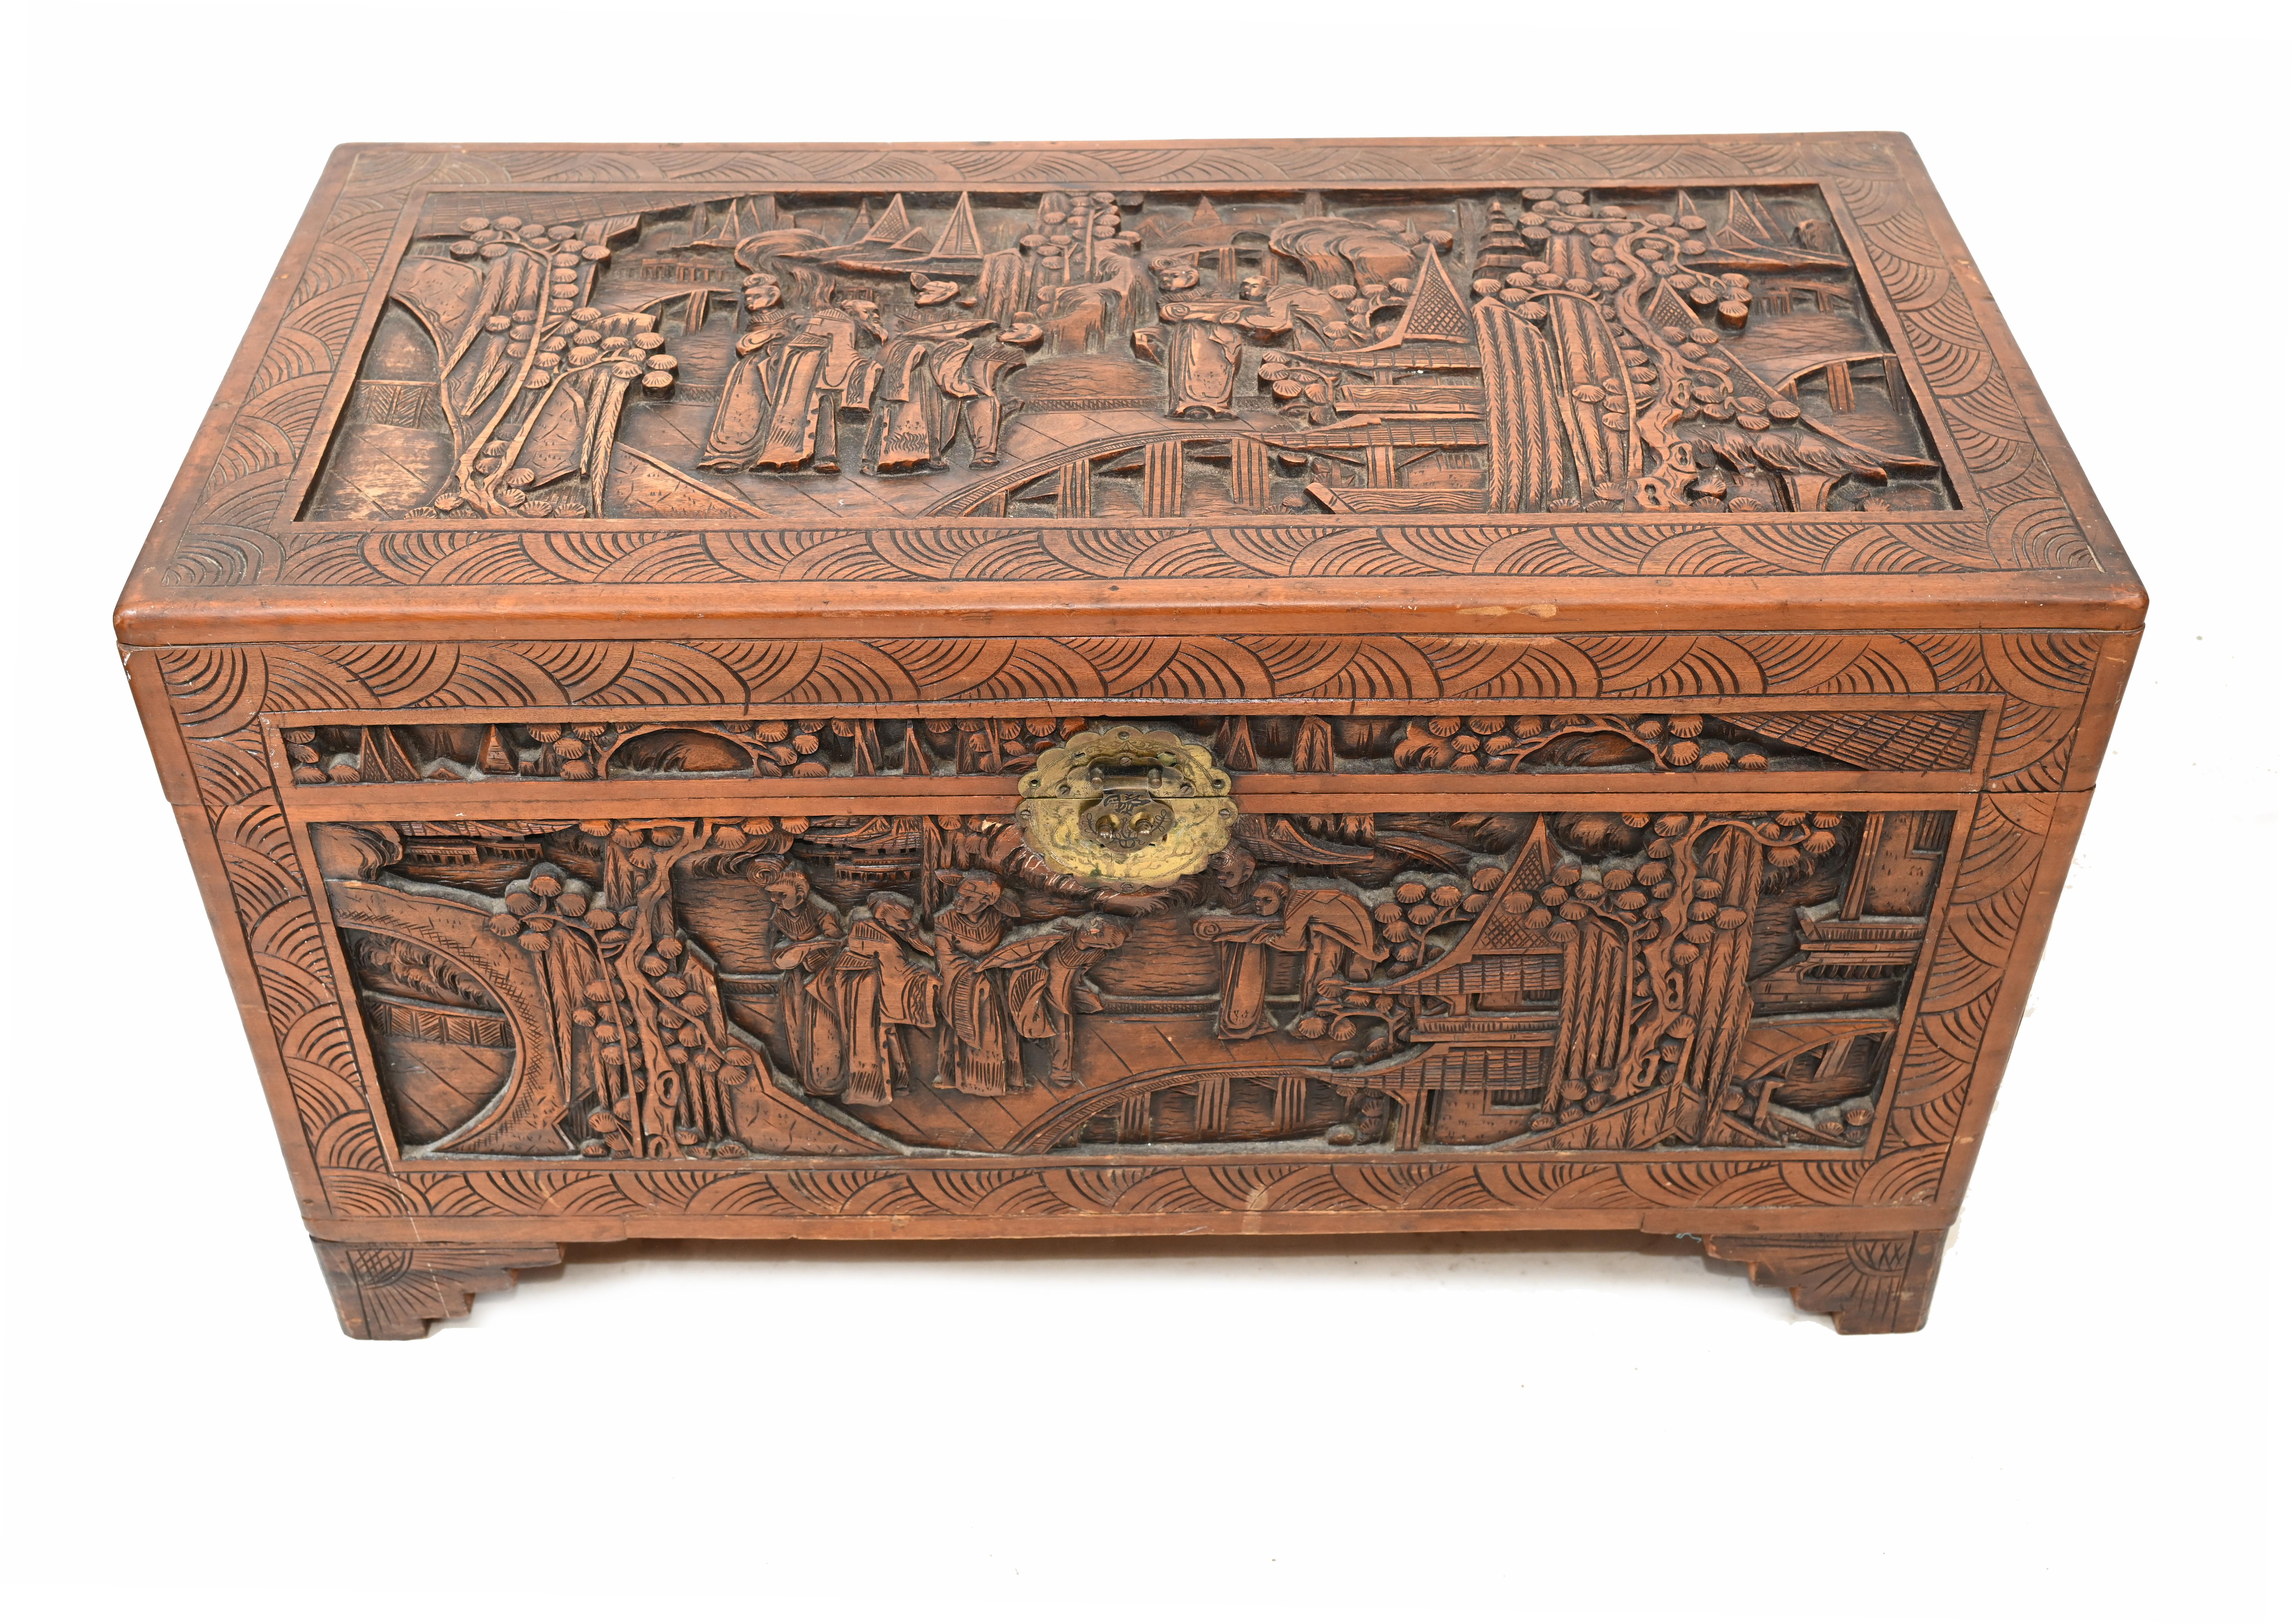 Gorgeous Chinese carved chest crafted from camphor wood
Very detailed carving showing Chinese figurines and a temple
Opens out to reveal lots of storage
Great interiors piece and highly collectable
Can also function as a coffee table
We date